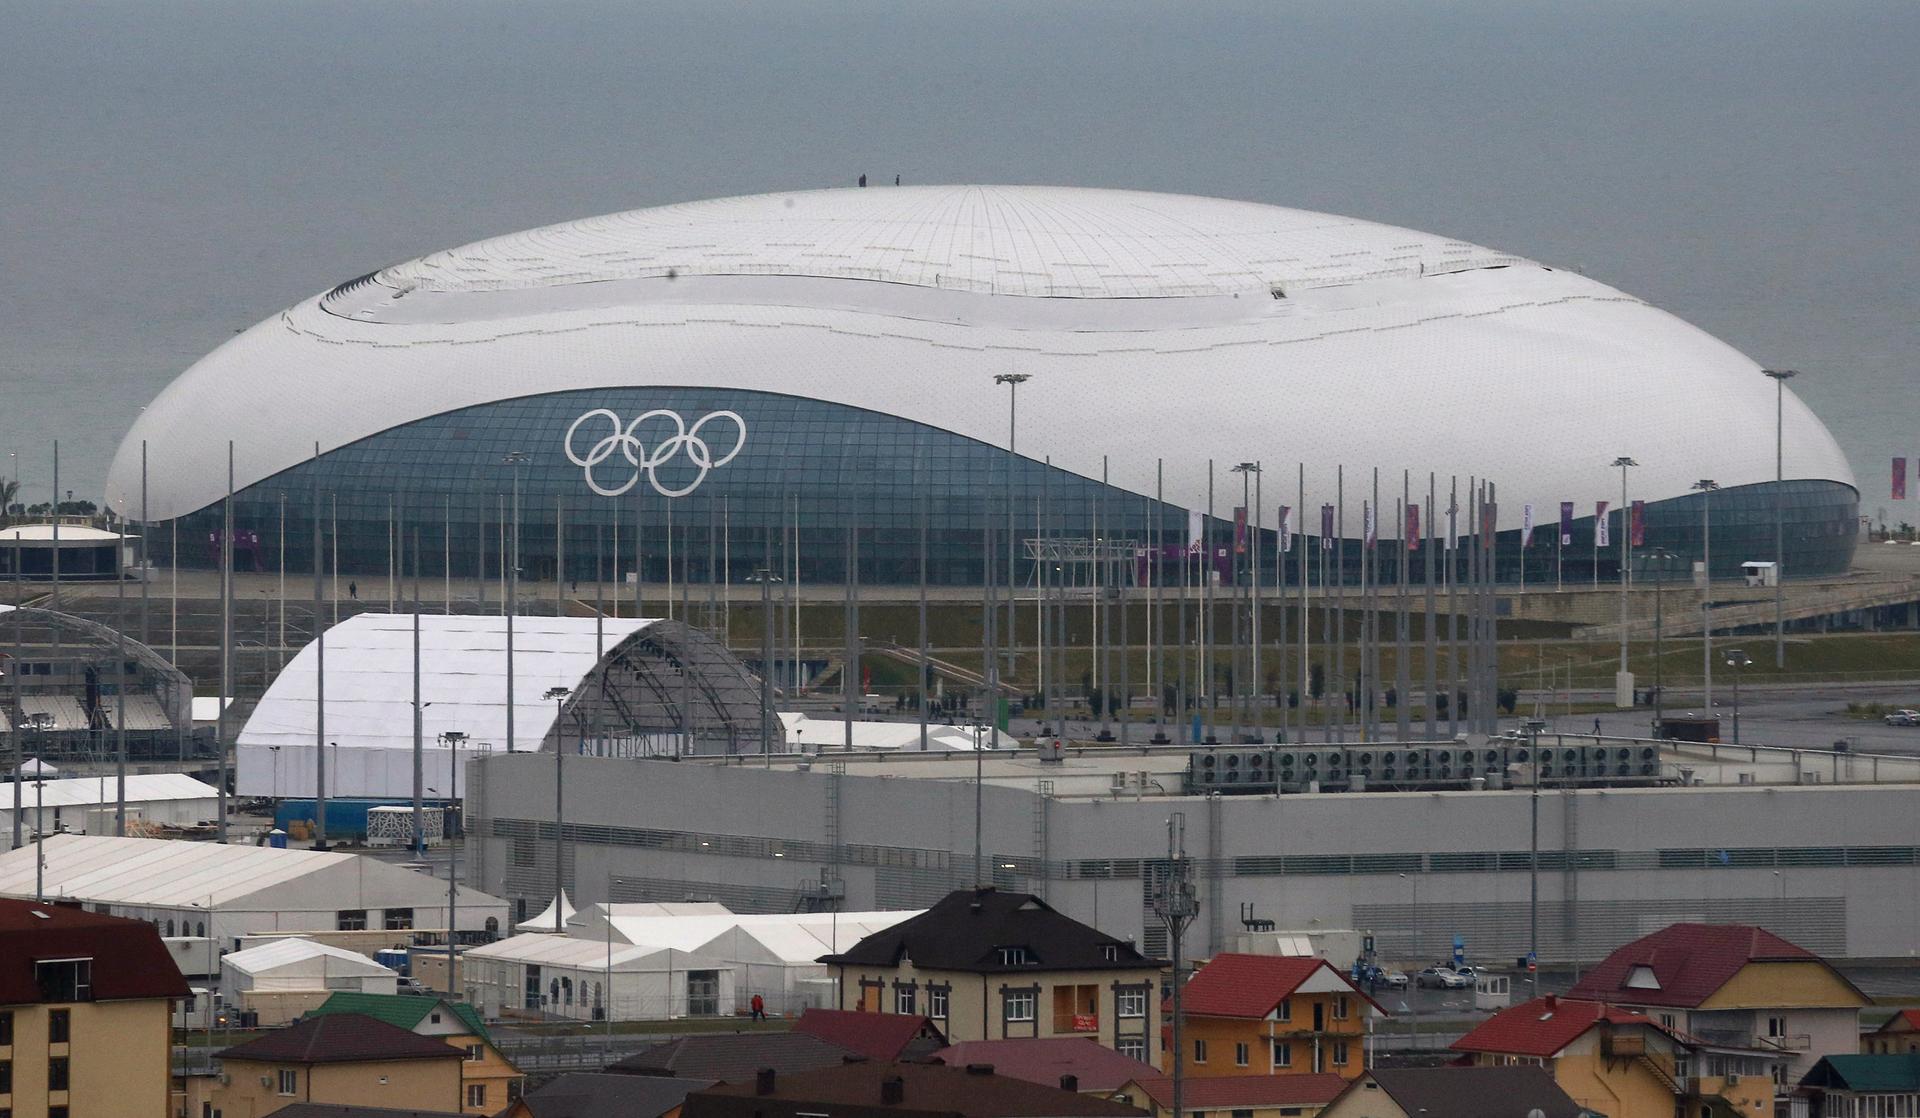 A view of the Bolshoi Ice Palace in the Adler district of Sochi. The building is the hockey venue for the Sochi 2014 Olympics, which begin on February 7th. After the Olympics, it will serve as a sports arena and concert venue.